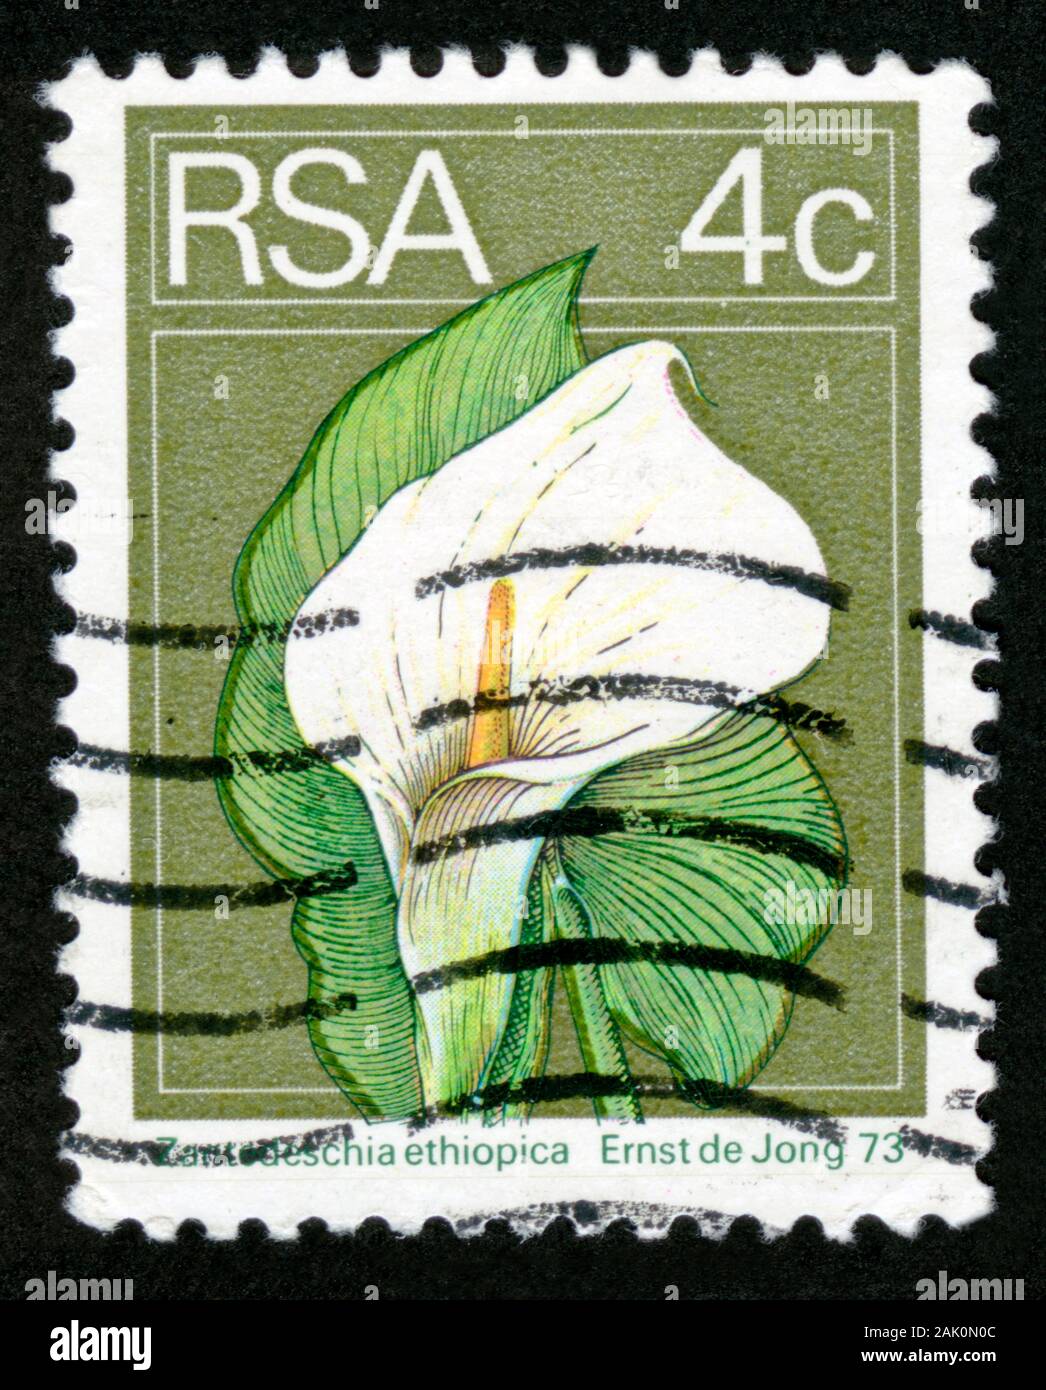 Rsa Postage Stamp Stock Photos & Rsa Postage Stamp Stock Images - Page ...